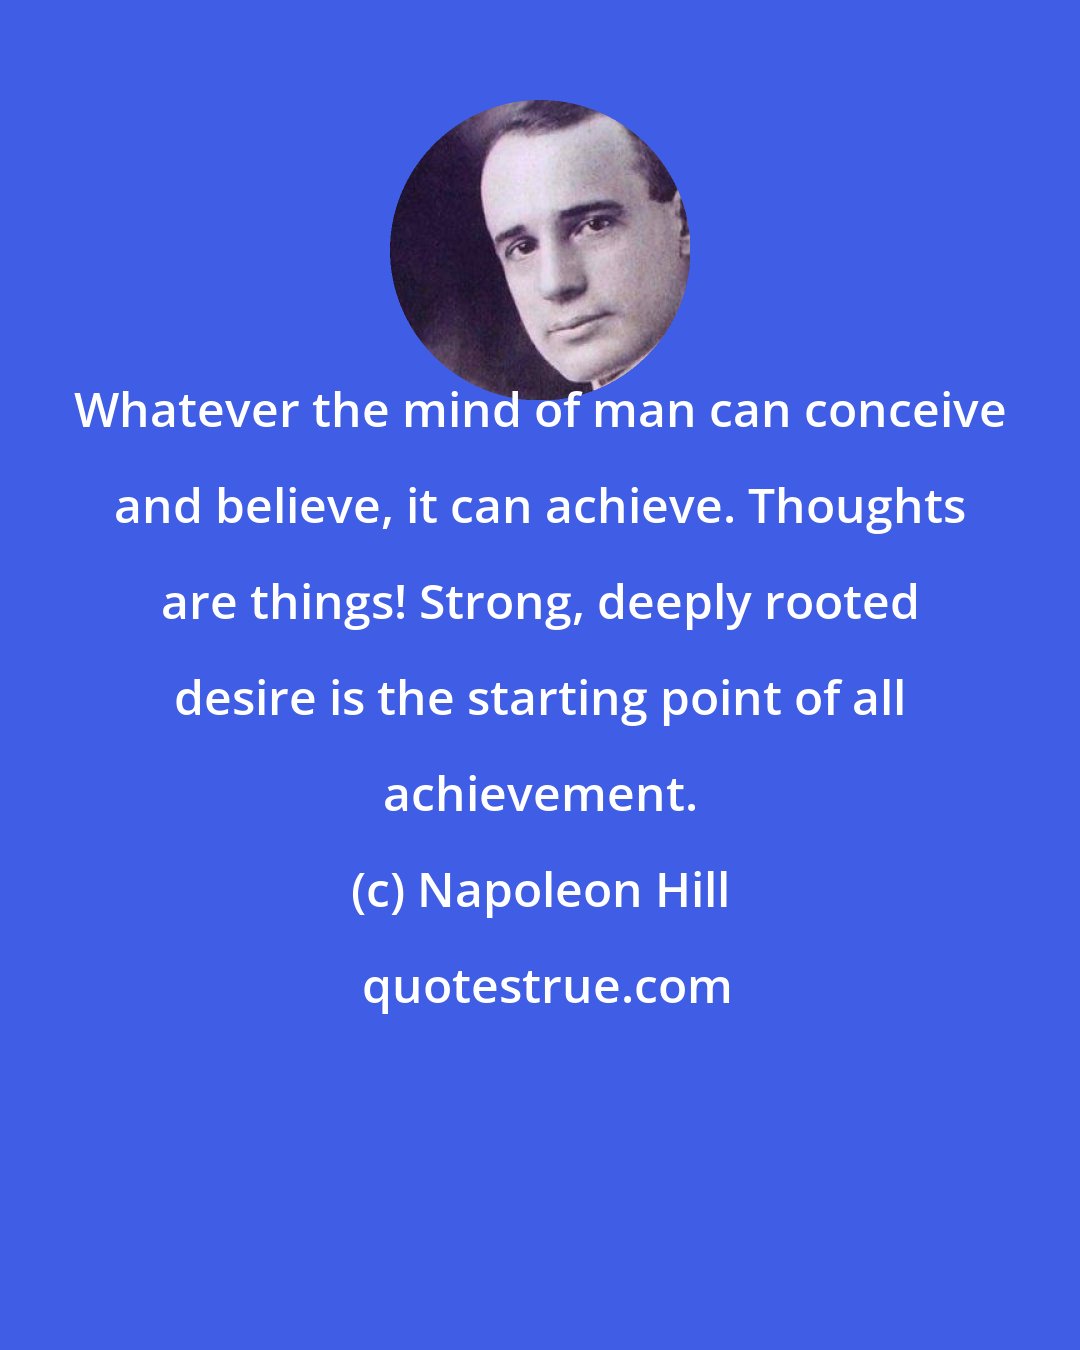 Napoleon Hill: Whatever the mind of man can conceive and believe, it can achieve. Thoughts are things! Strong, deeply rooted desire is the starting point of all achievement.